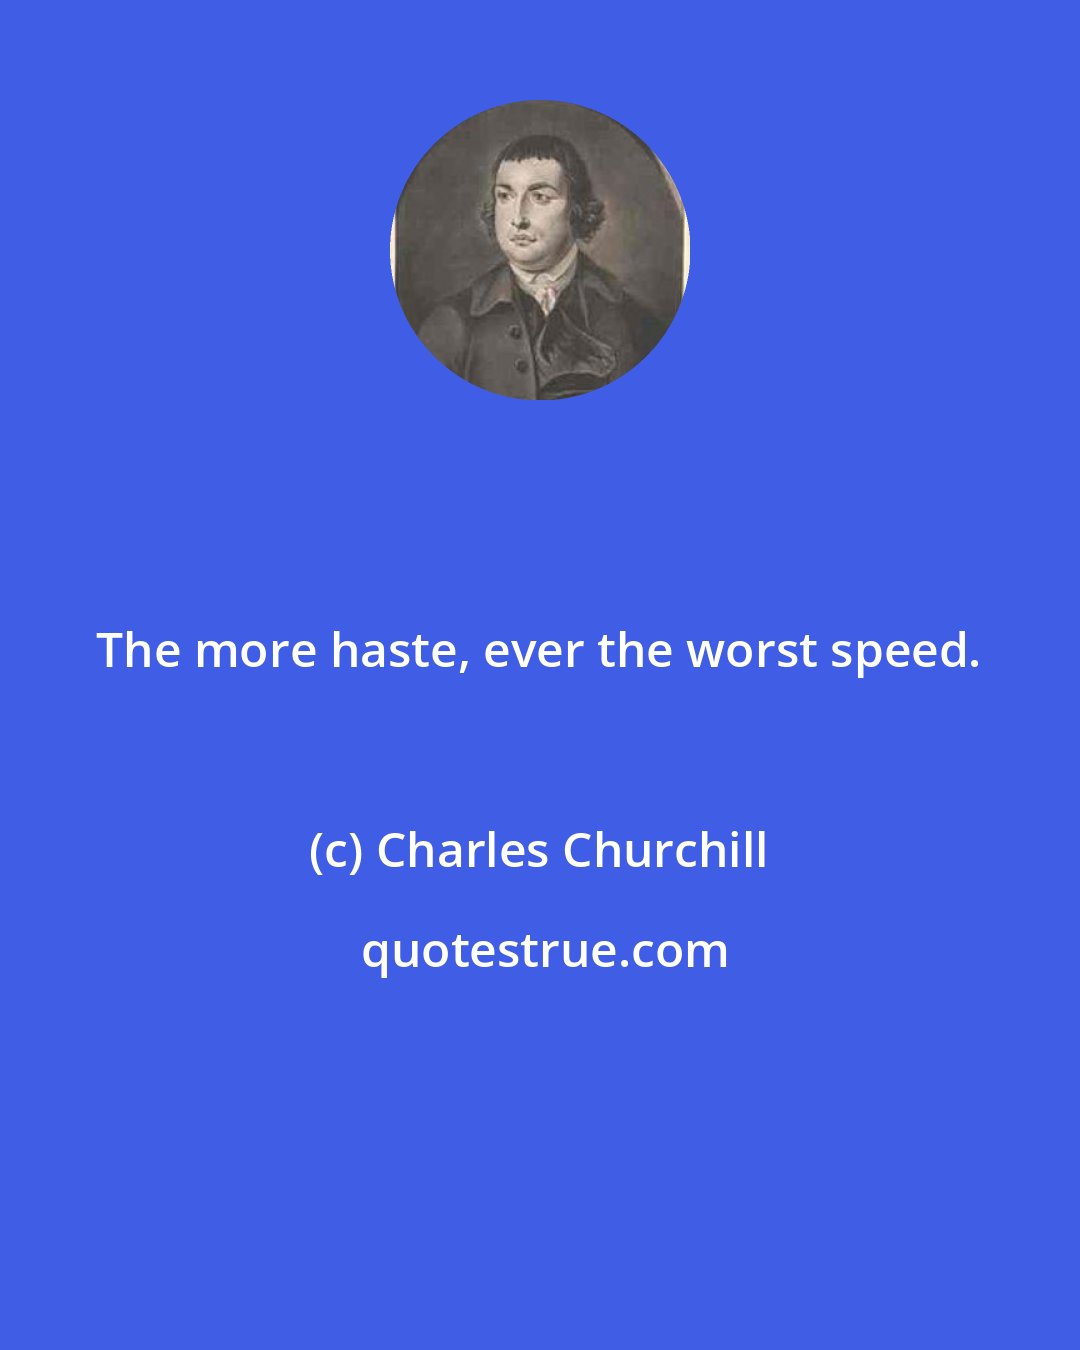 Charles Churchill: The more haste, ever the worst speed.